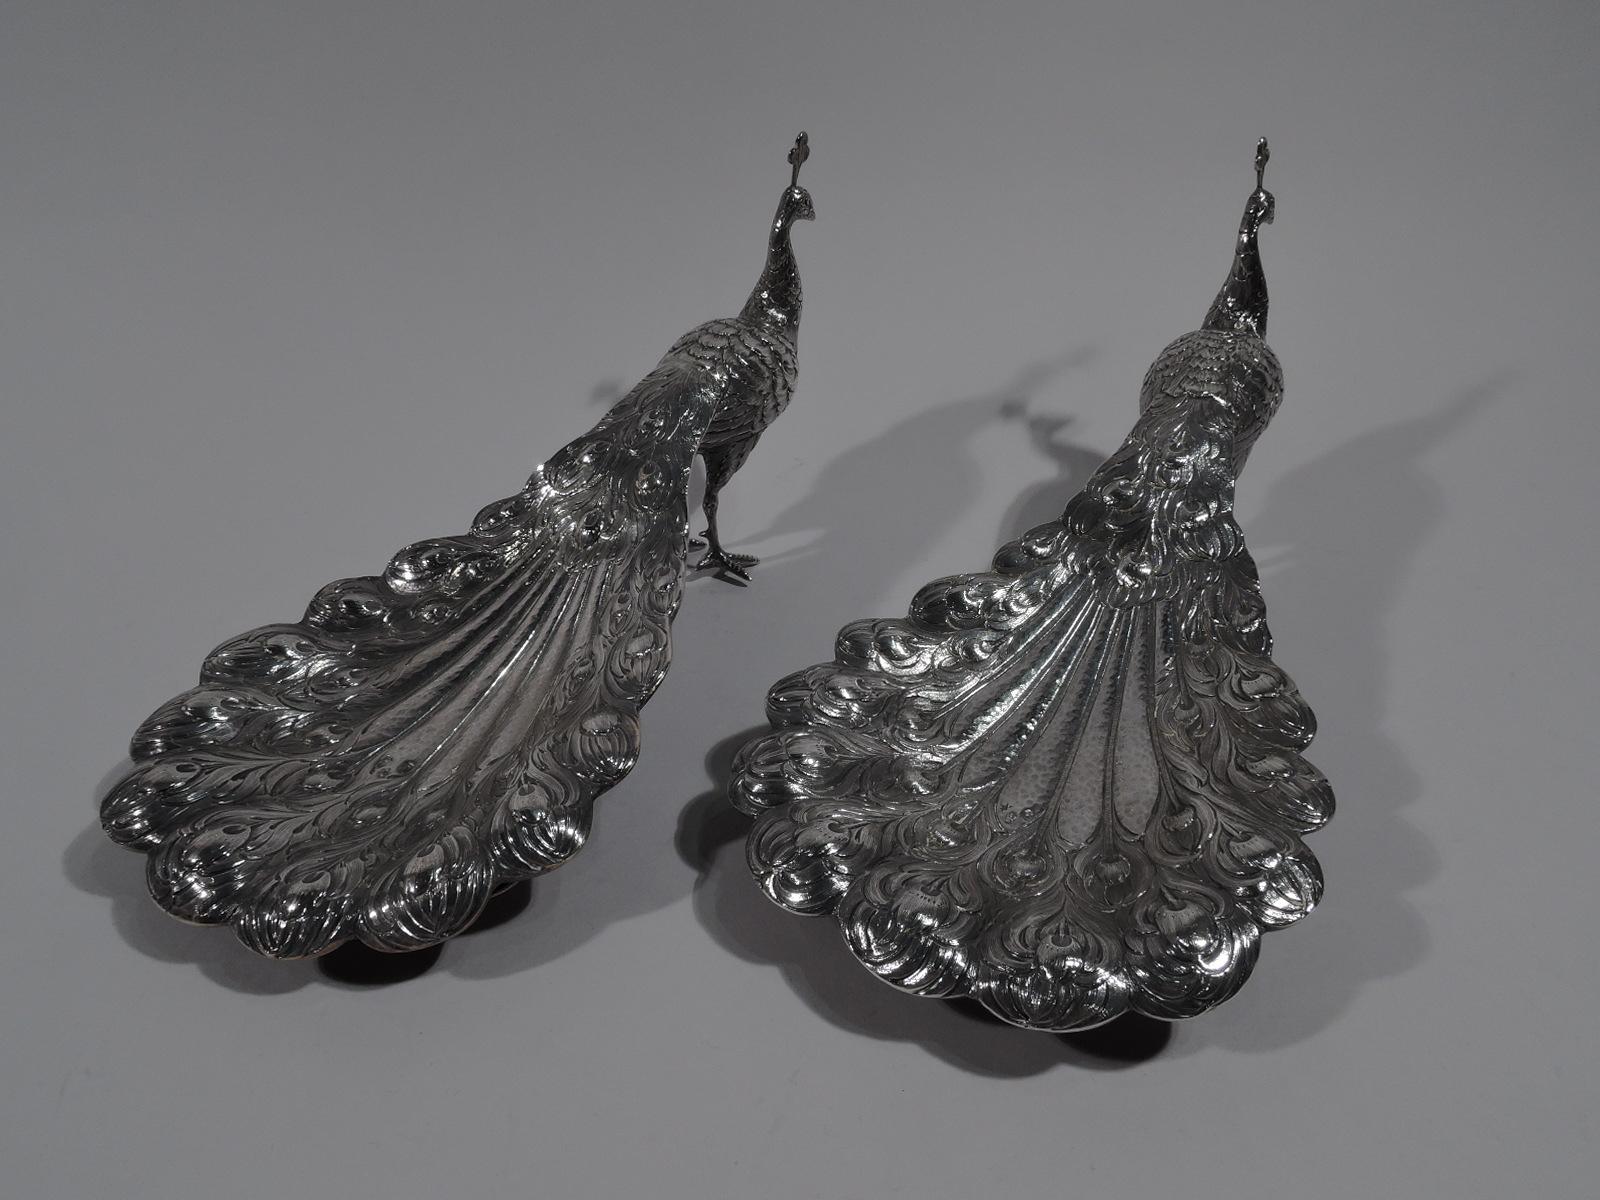 Pair of turn-of-the-century German 800 silver peacocks. Each: Downy body, scaly talons, and erect head with crest. Flamboyant downed tails are hollow for holding treats at your next dinner party. They’re boy birds—a welcome addition to the guest